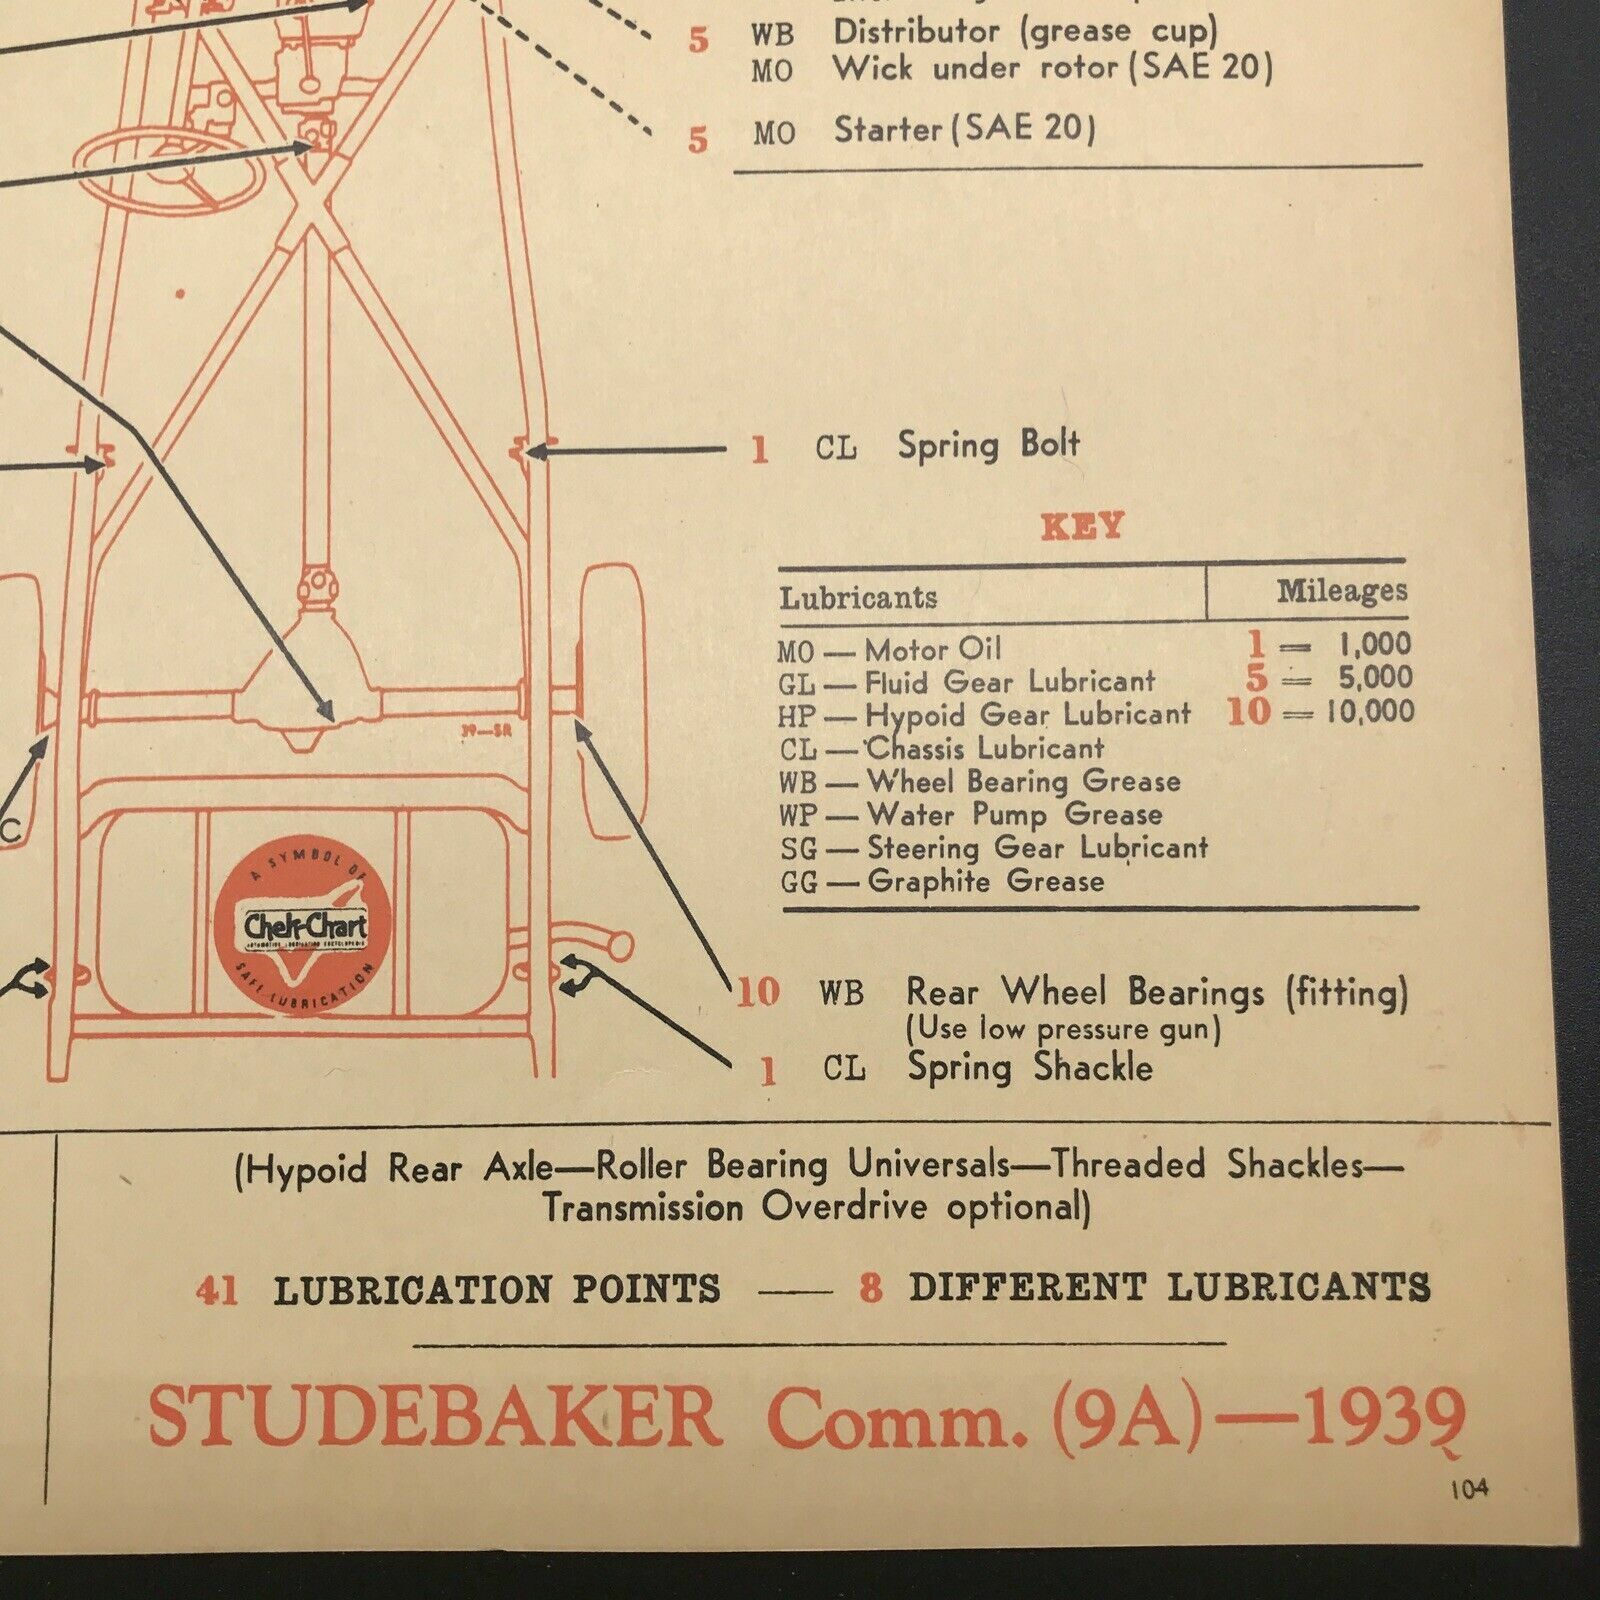 1939 STUDEBAKER COMM. (9A) Chek-Chart Tune-Up Lubrication Points Lubricant Sheet